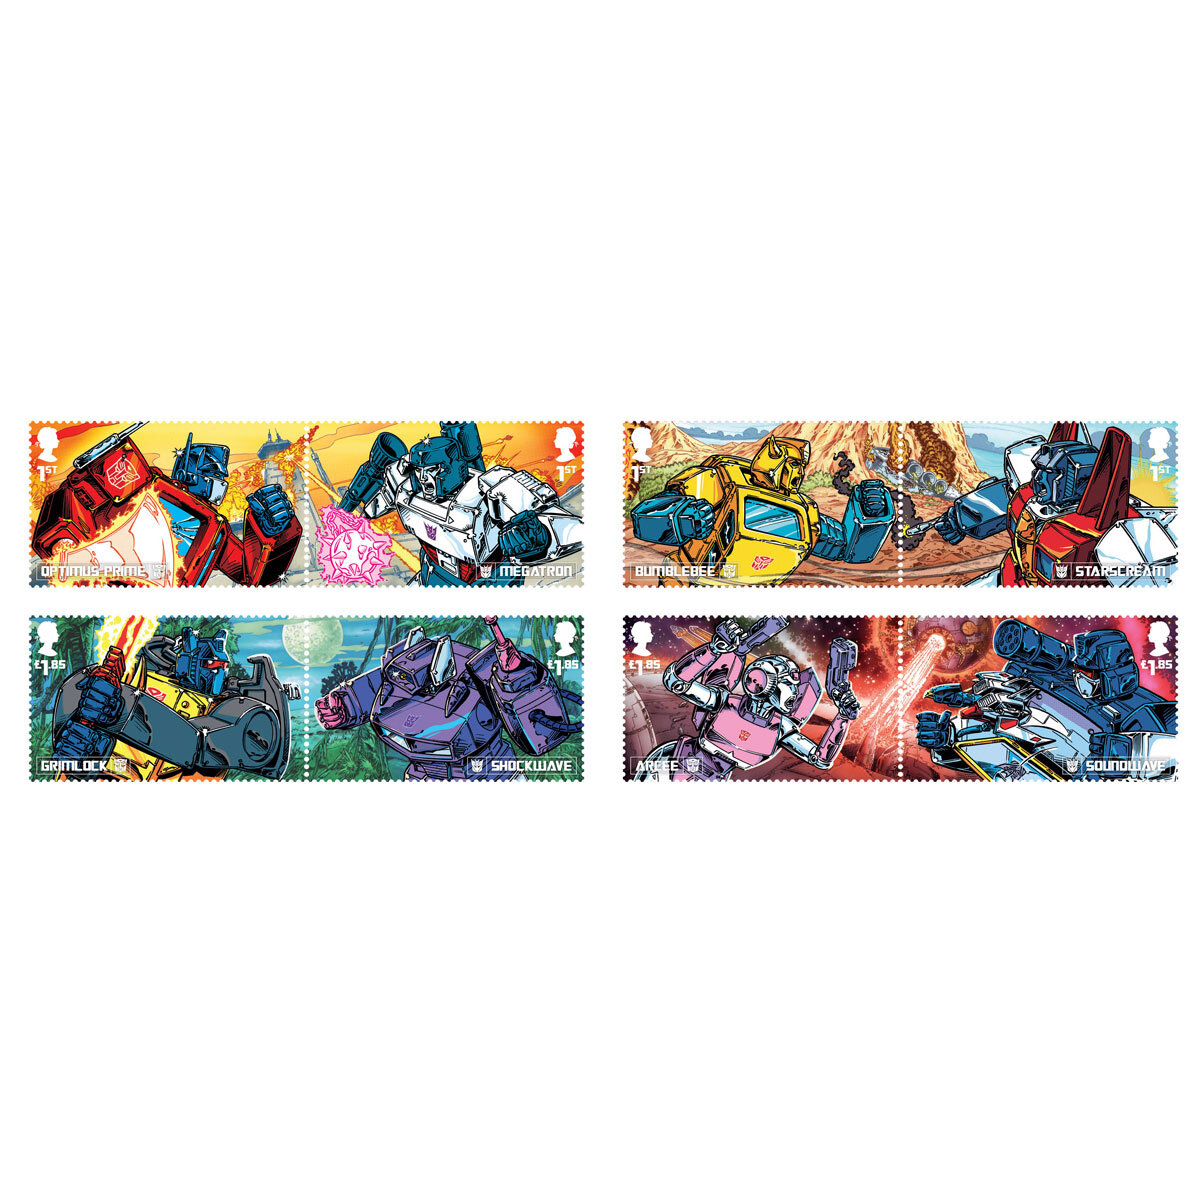 Buy Transformers Framed Stamps and Miniature Sheet Overview2 Image at Costco.co.uk